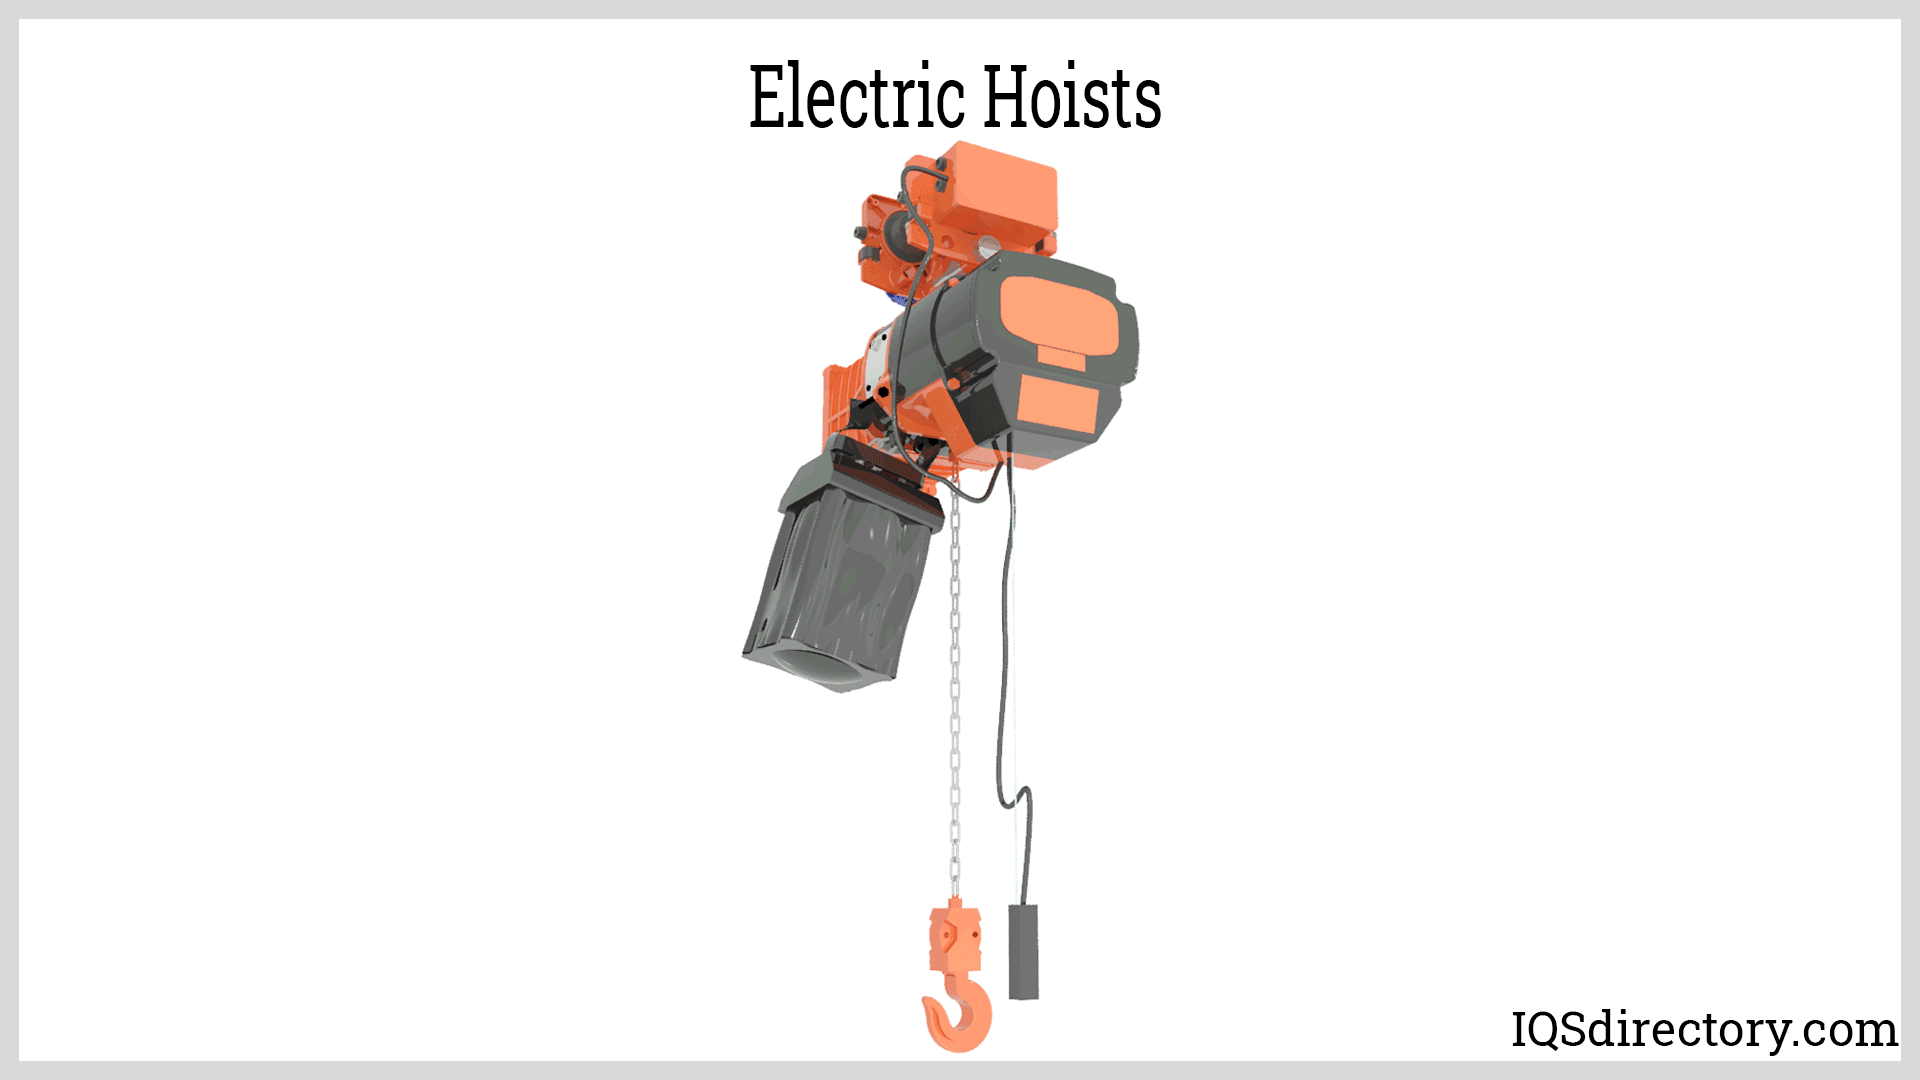 Electric Hoist: What Is It? How Does It Work? Types, Uses